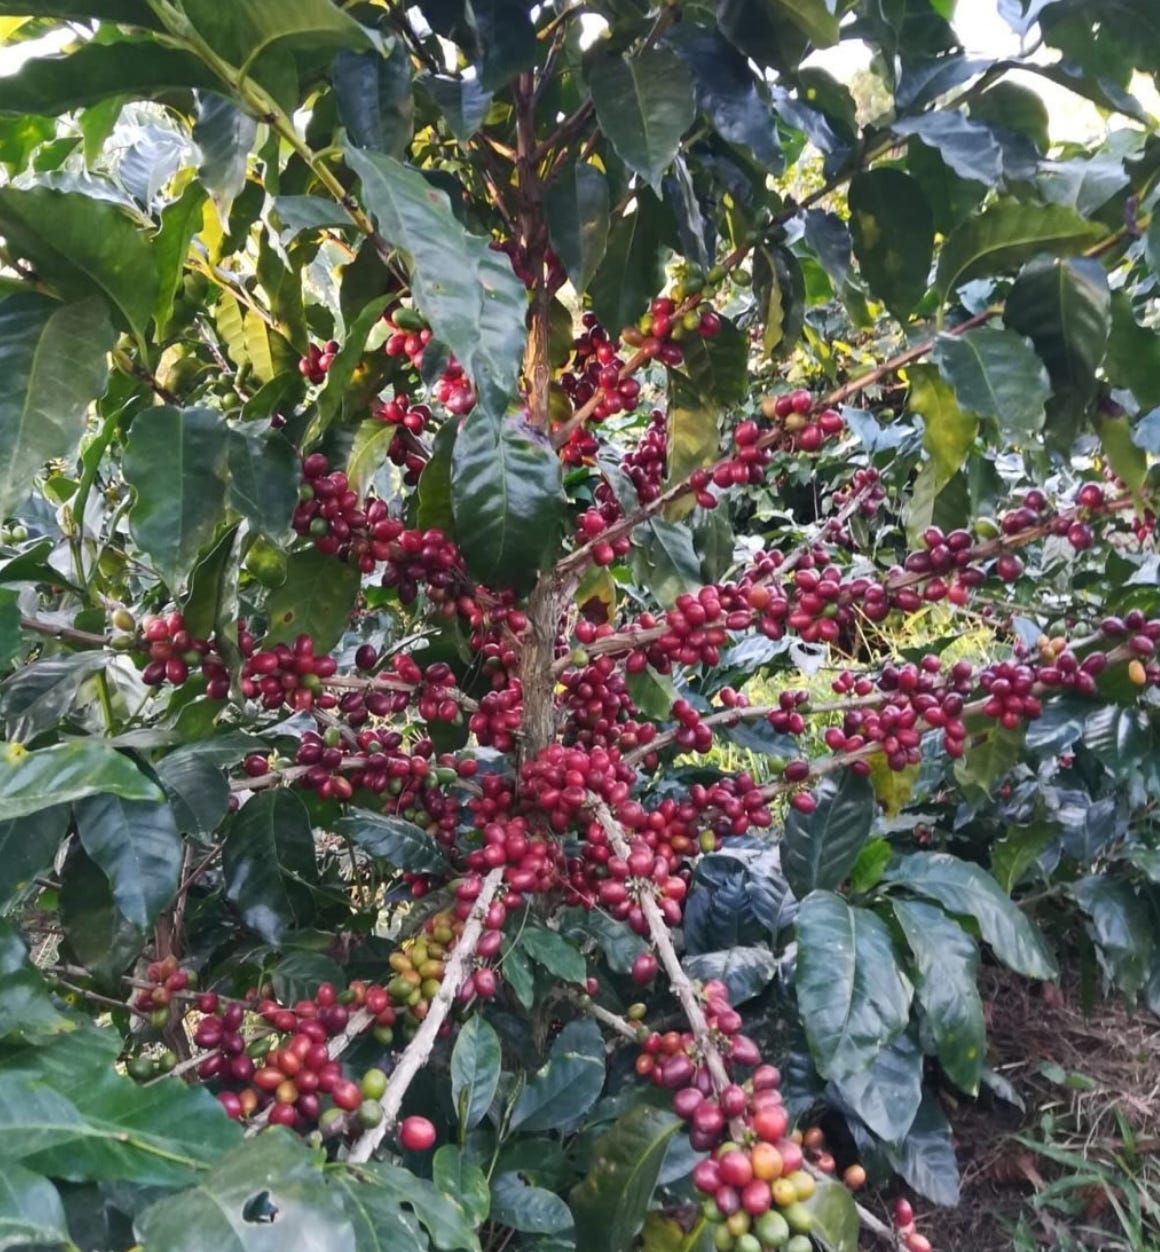 A close up of bright red coffee cherries on the tree surrounded by waxy green coffee tree leaves.